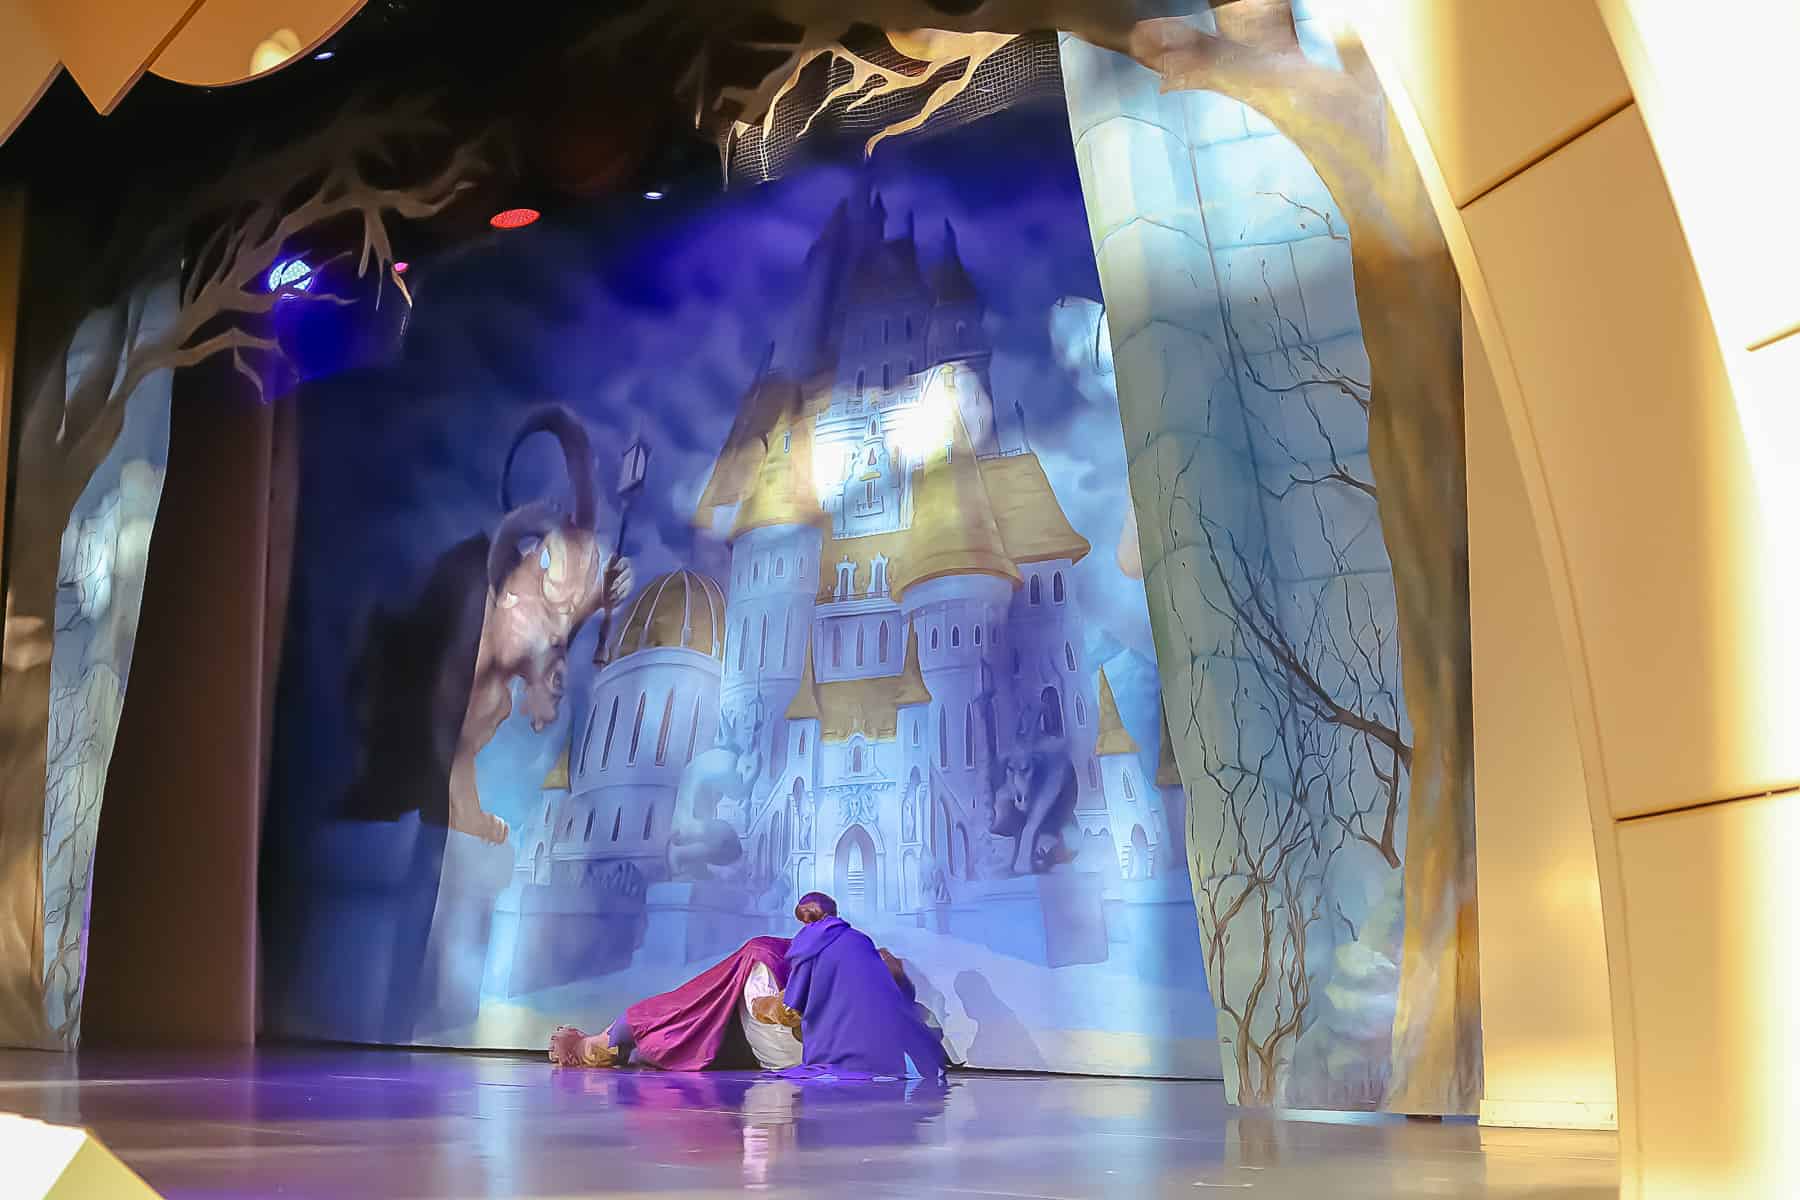 Belle rushes to Beast's side. 